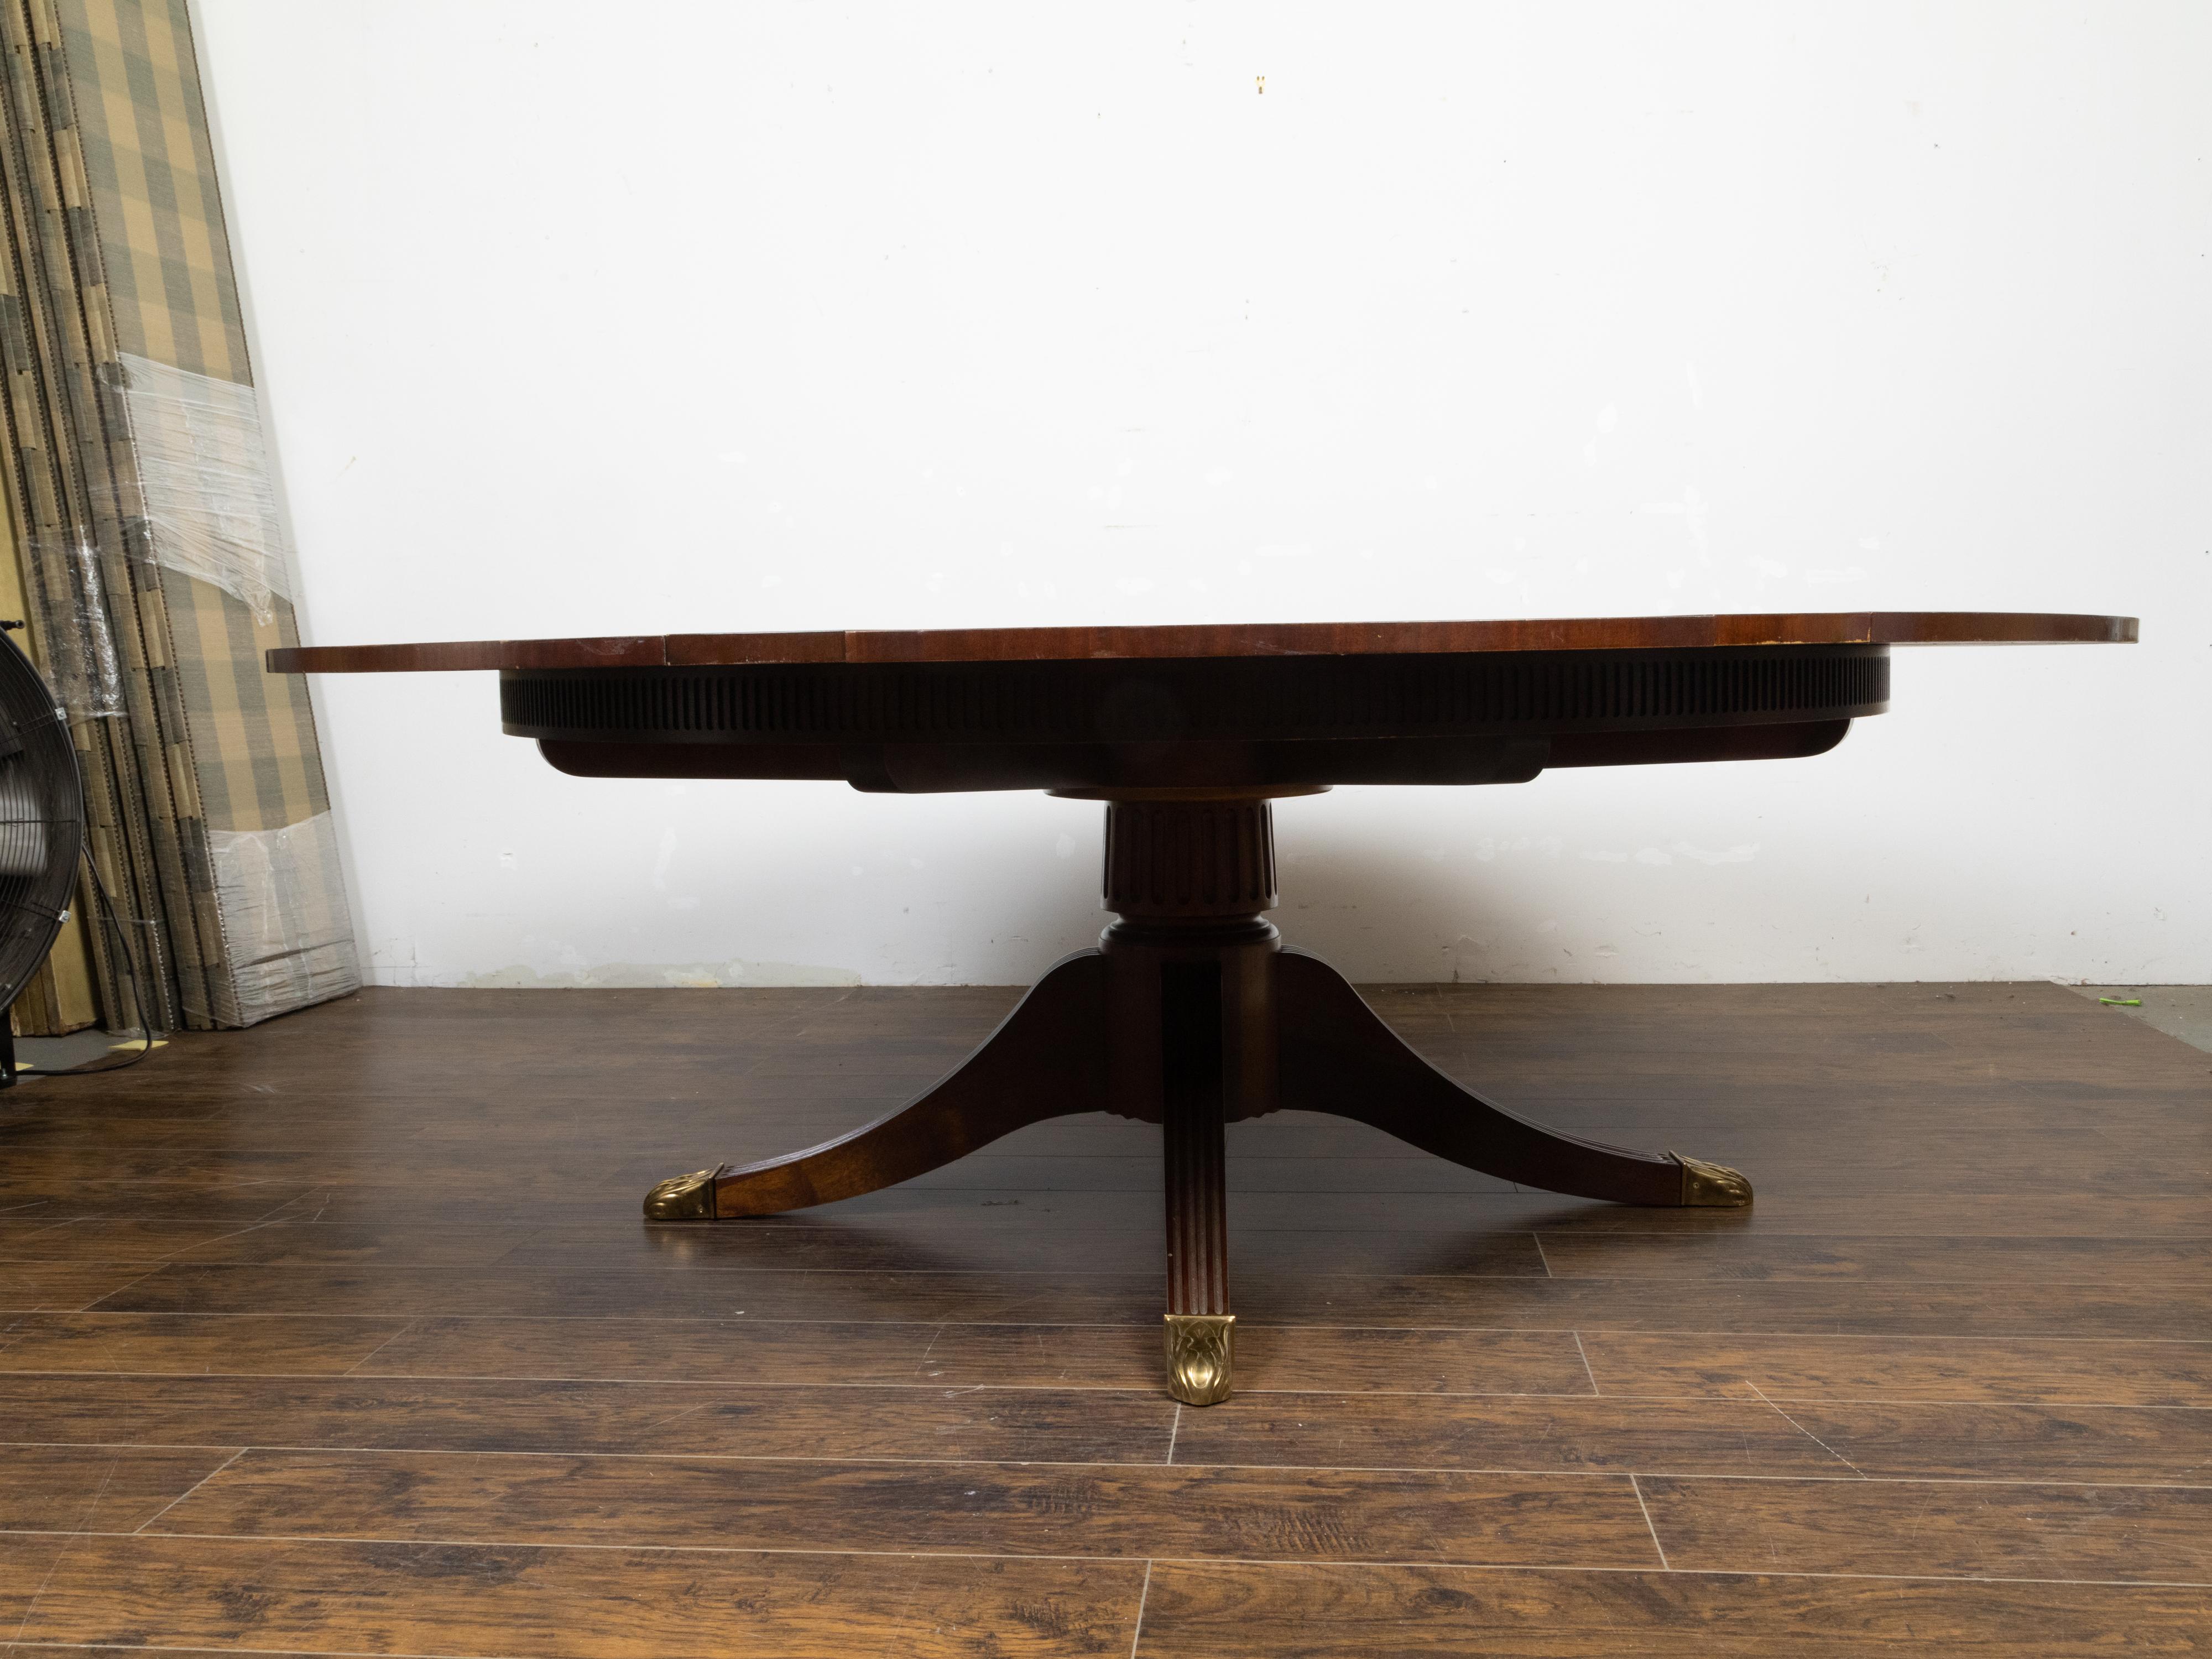 A vintage Regency style mahogany extending dining table by Baker Furniture Company called the 'Capstan', part of the Stately Homes Collection from the late 20th century, with round swirling mahogany top, gilded brass tips, pie-crust style apron and